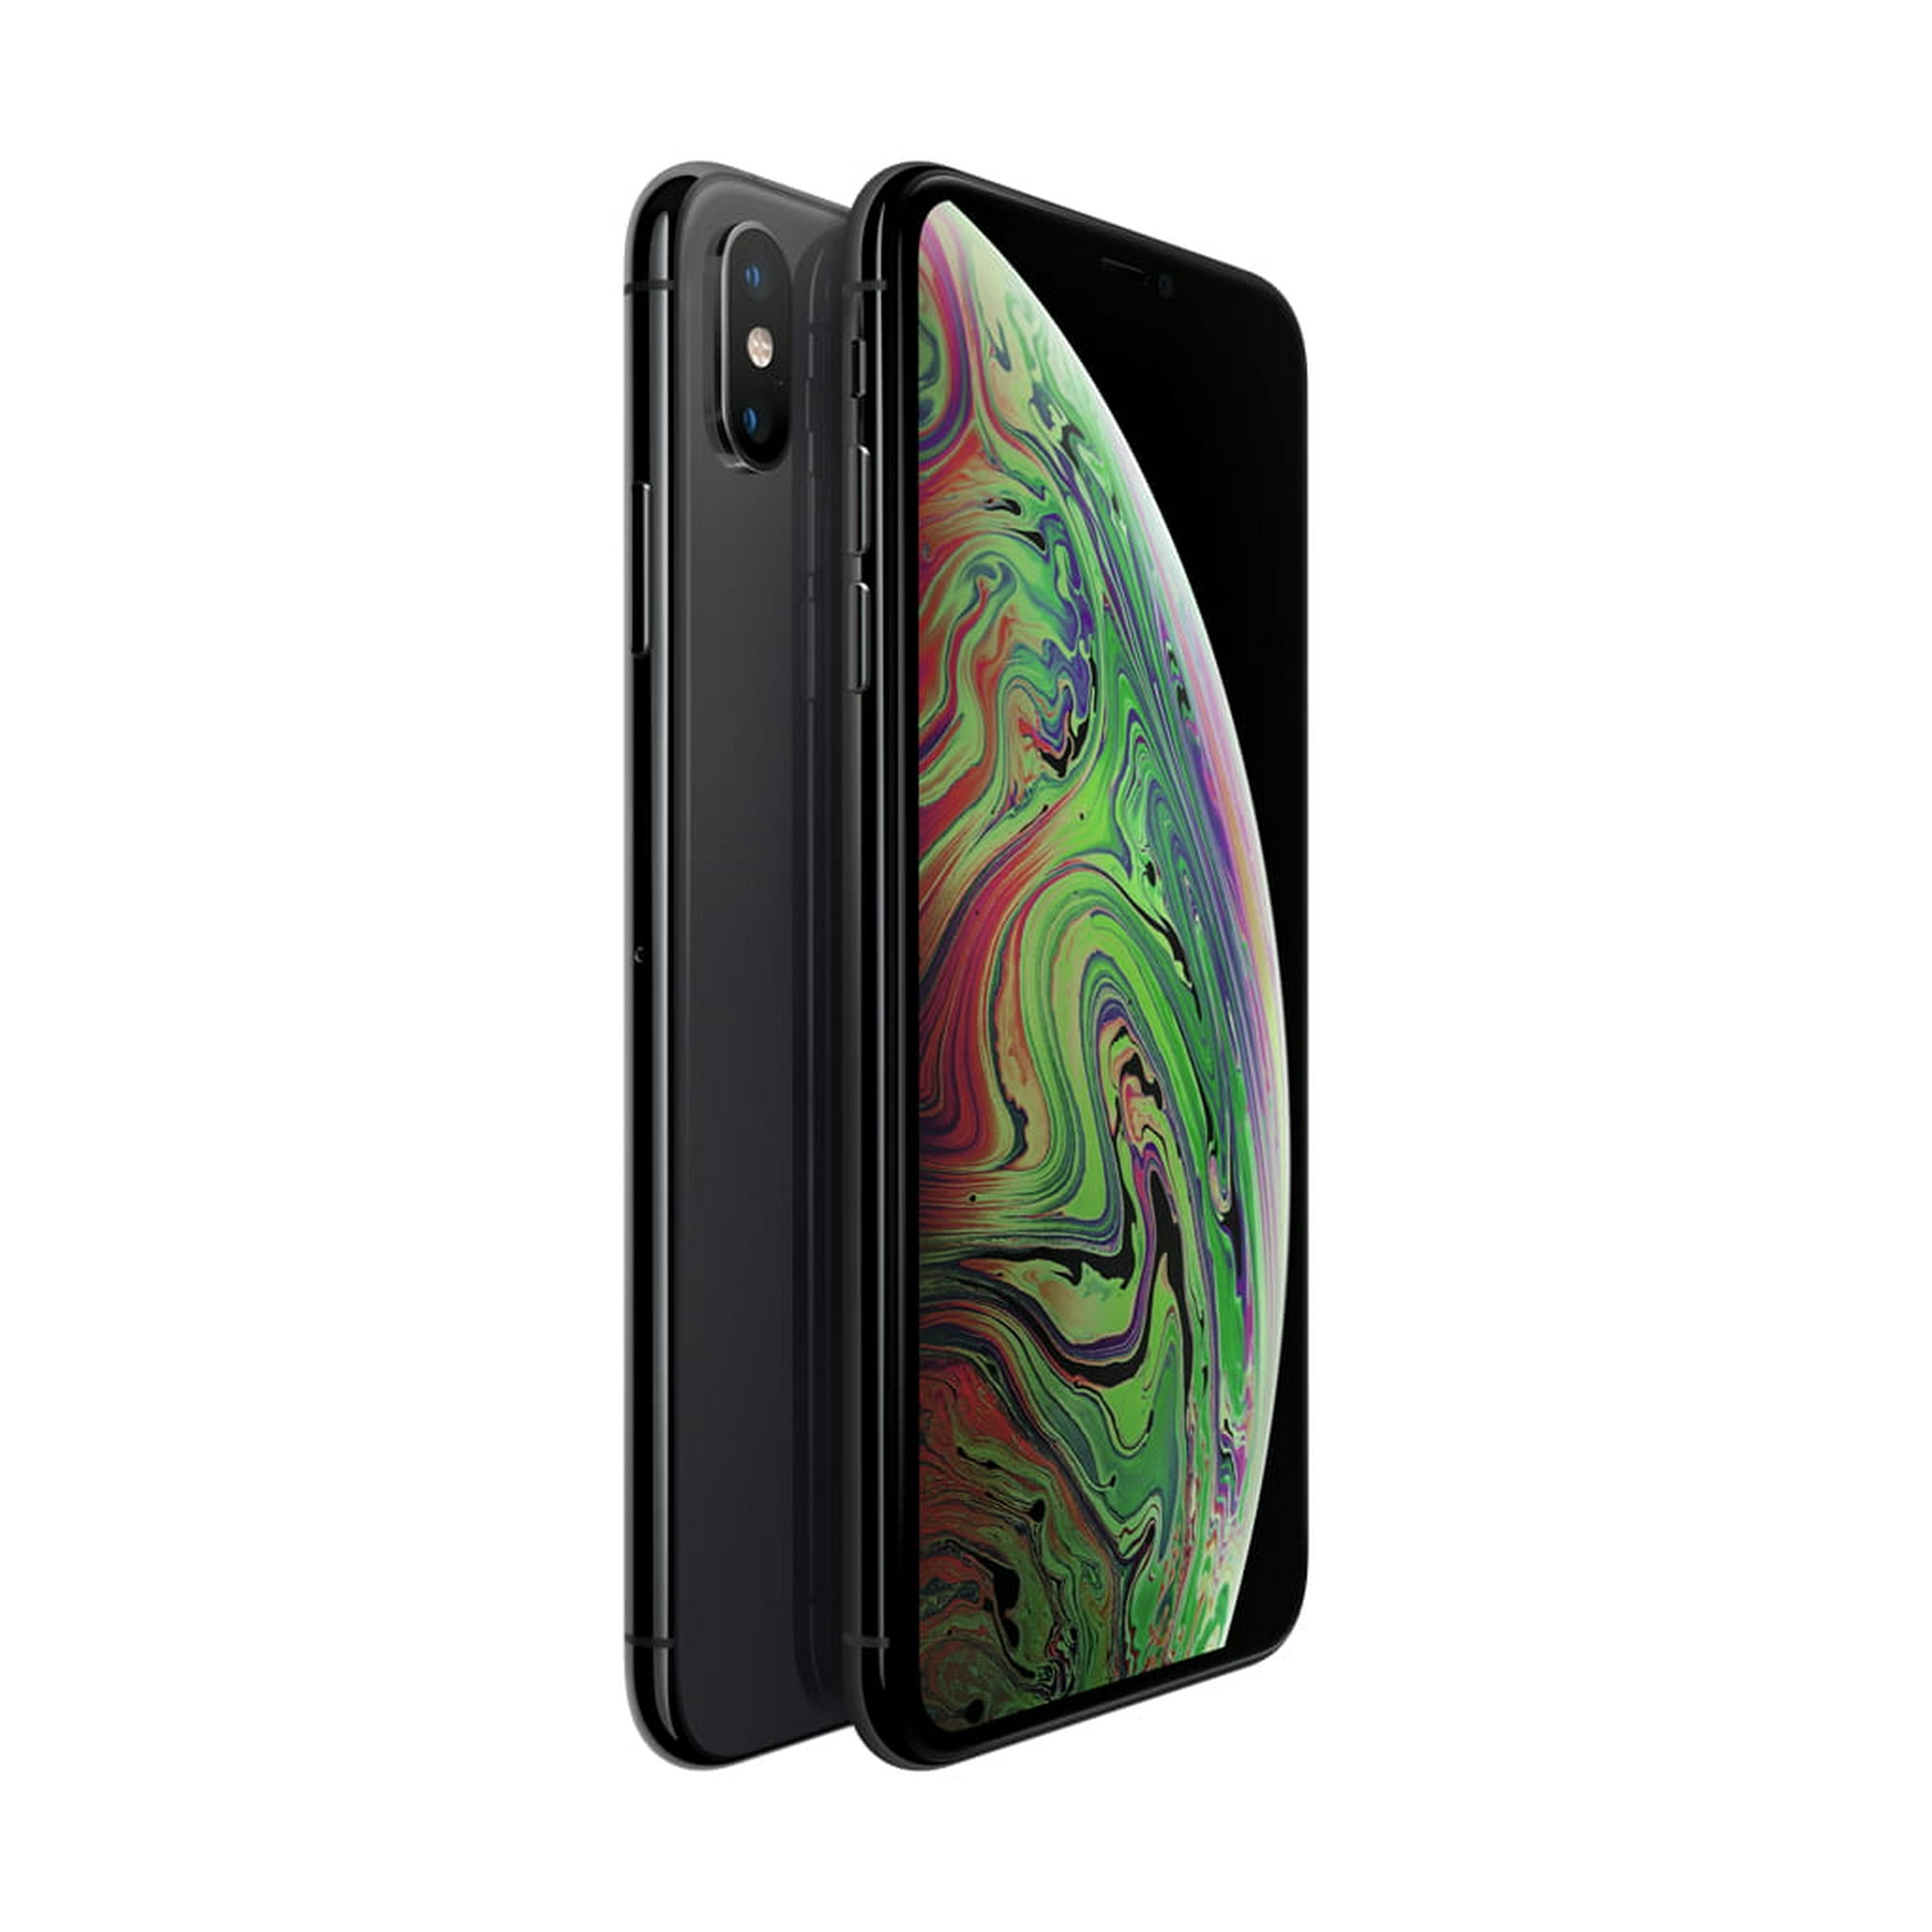 AT&T Apple iPhone XS Max 512GB, Space Gray - Upgrade Only